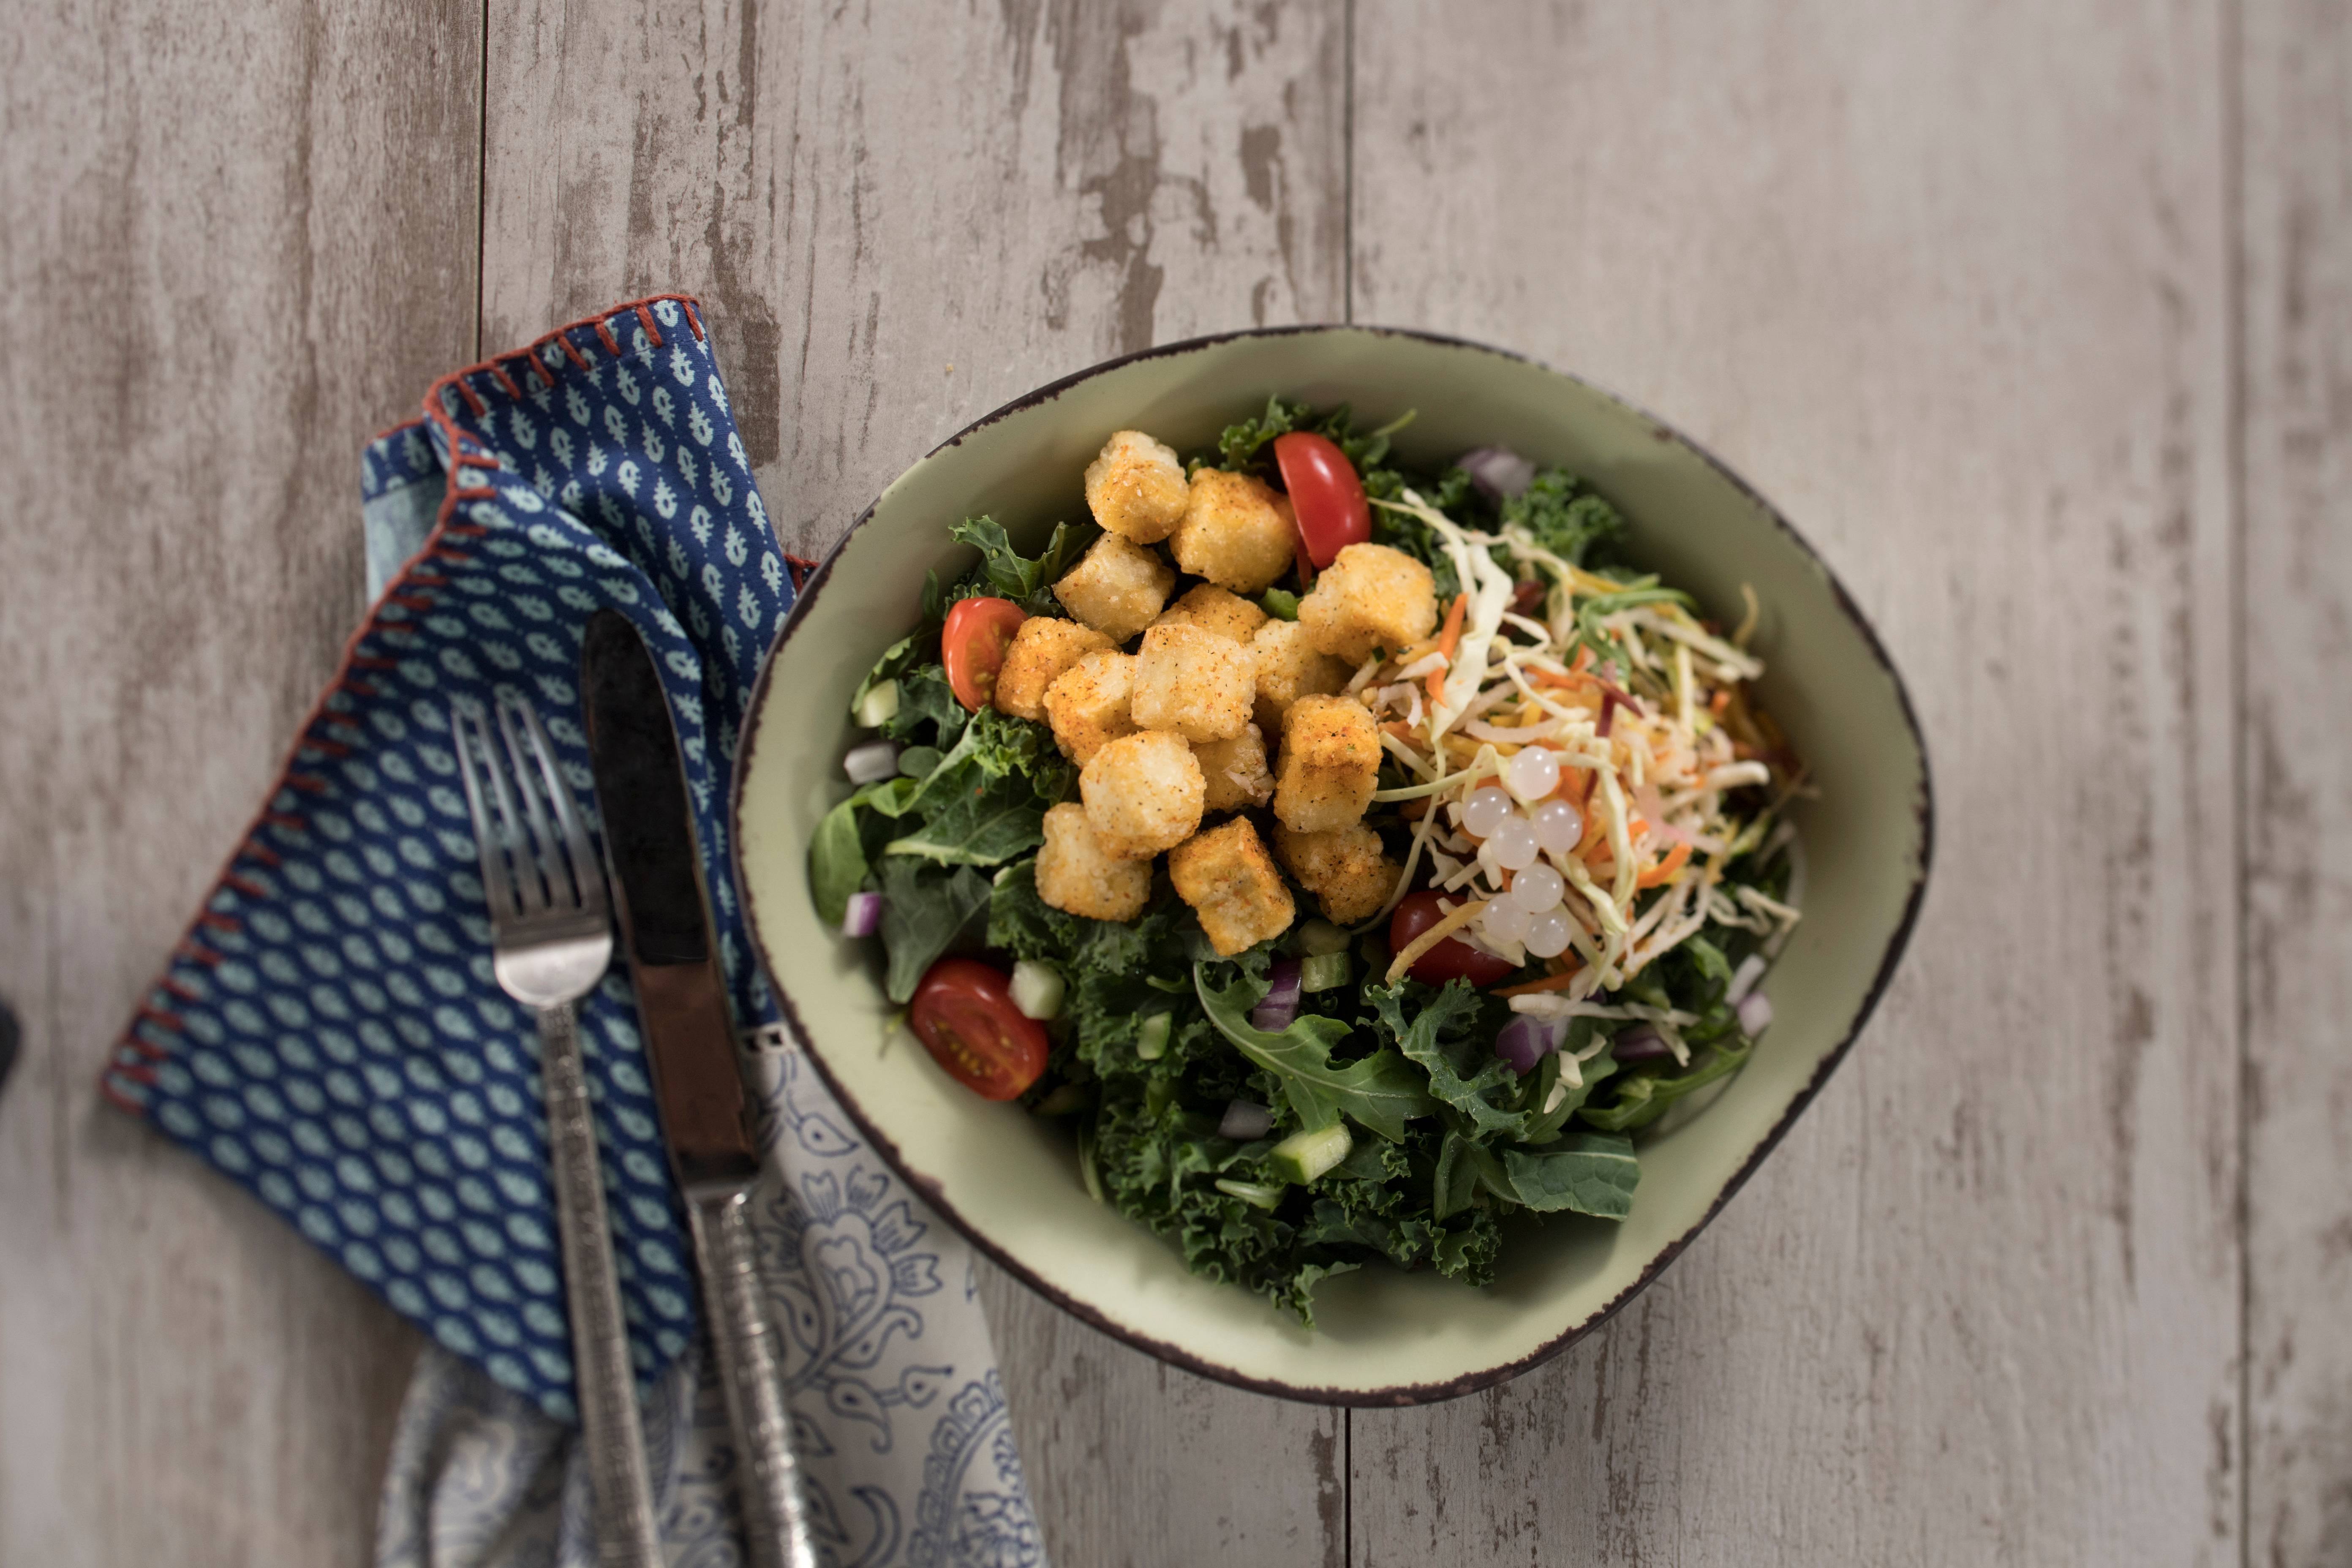 Plant Based Foods - Chili-Spiced Crispy Fried Tofu Bowl from Satu’li Canteen at Disney’s Animal Kingdom, which features crispy tofu, seasoned with chili-spice and topped with a crunchy vegetable slaw, boba balls and your choice of base and sauce